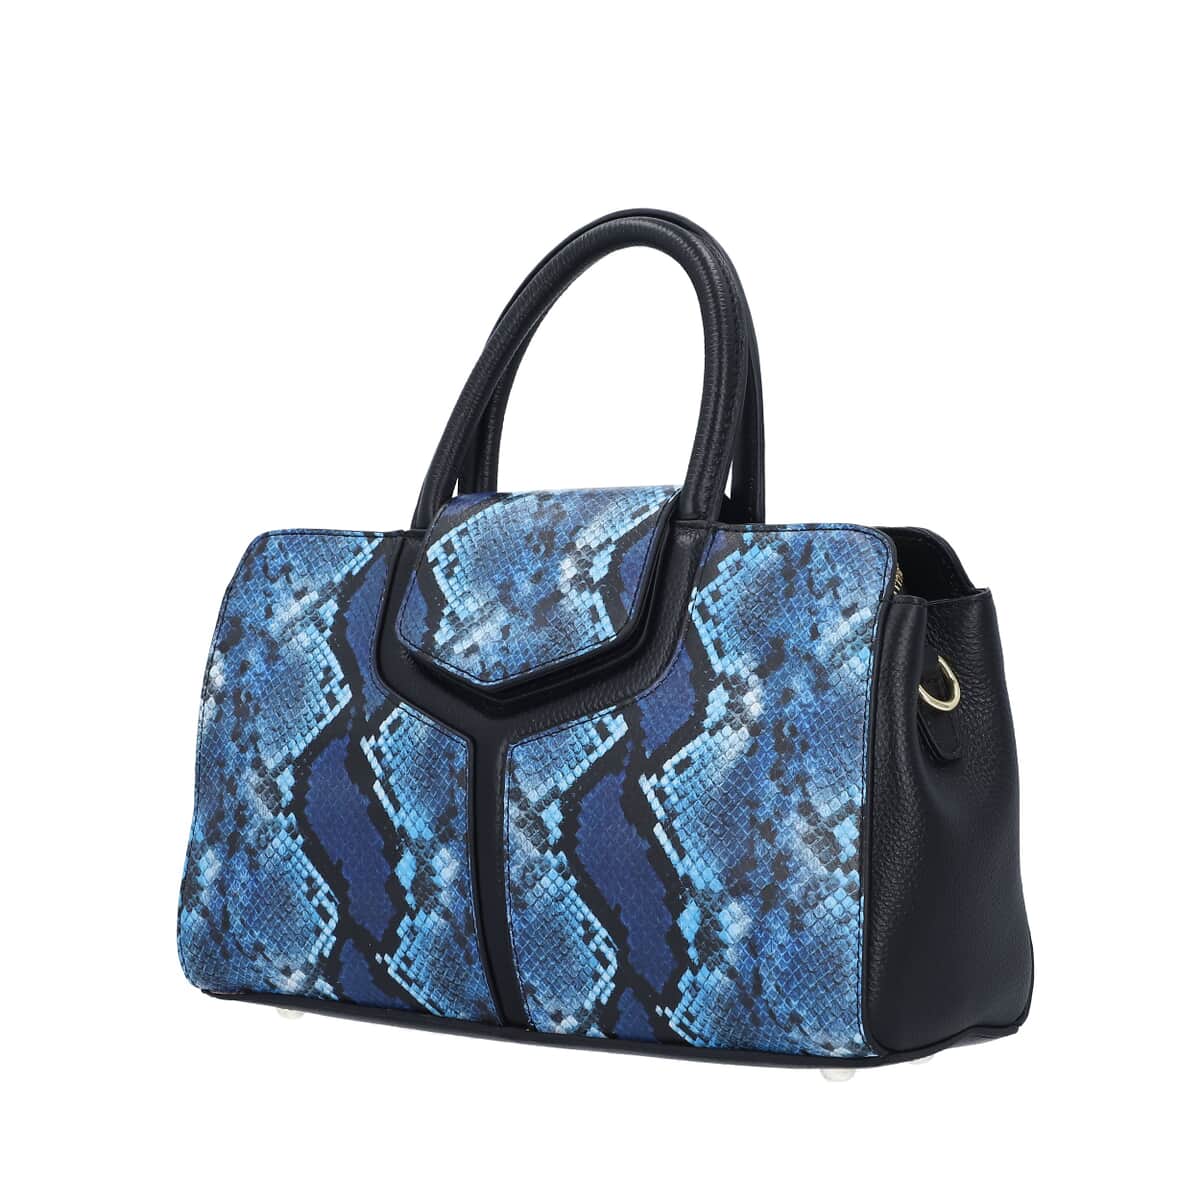 Black and Blue Snake Print Genuine Leather Convertible Tote Bag with Shoulder Strap image number 5